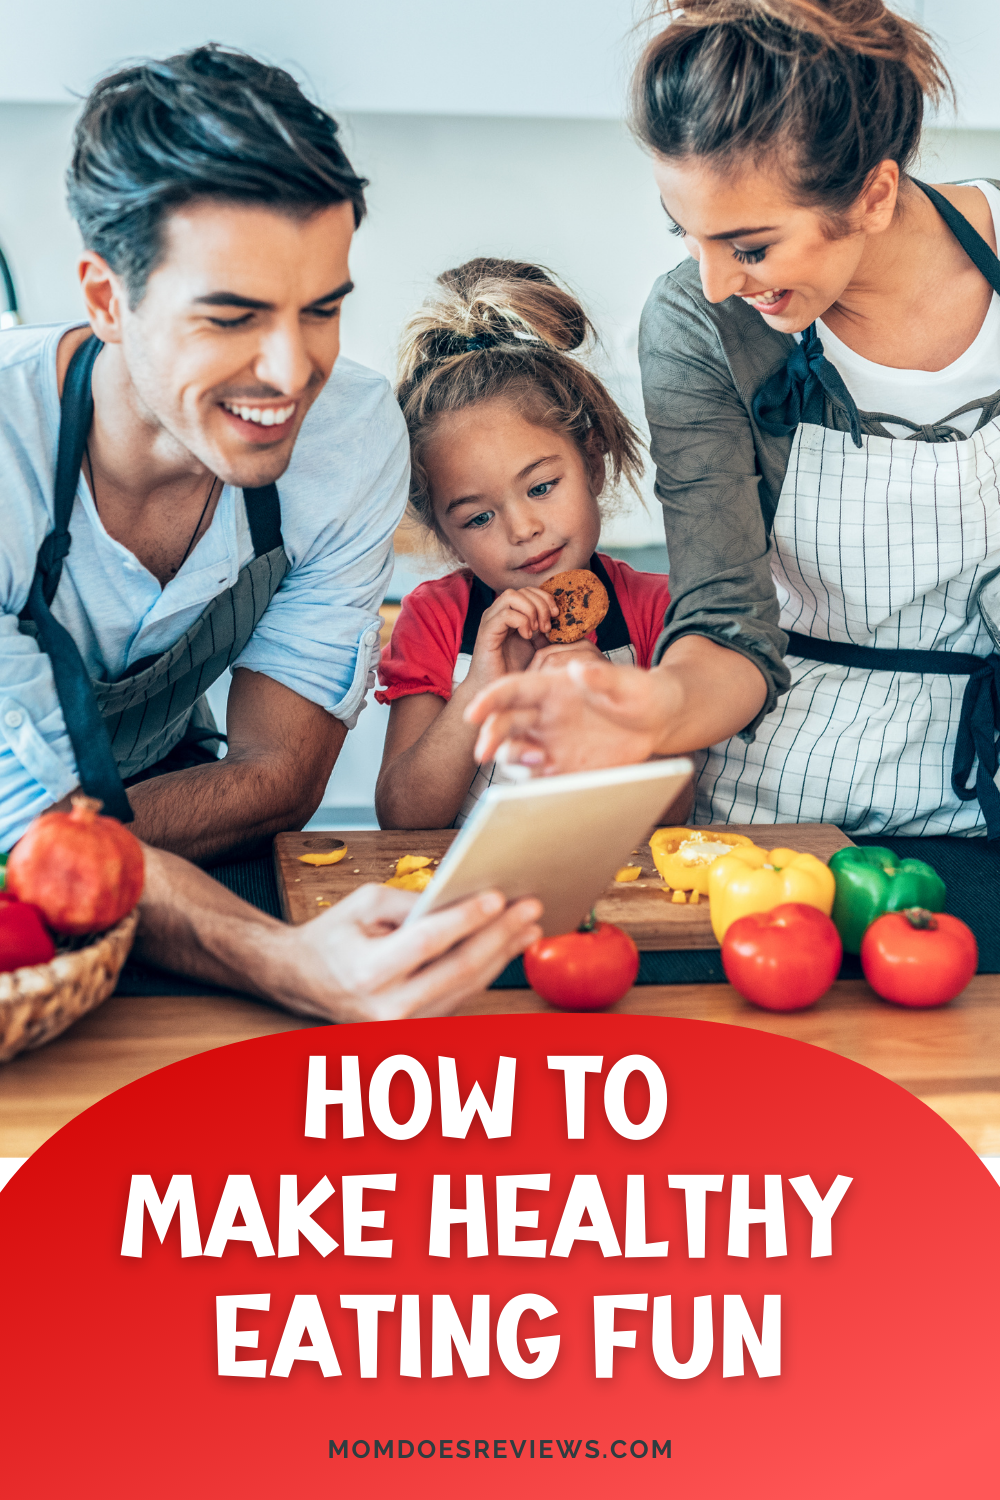 5 Ways To Make Healthy Eating Fun For The Whole Family